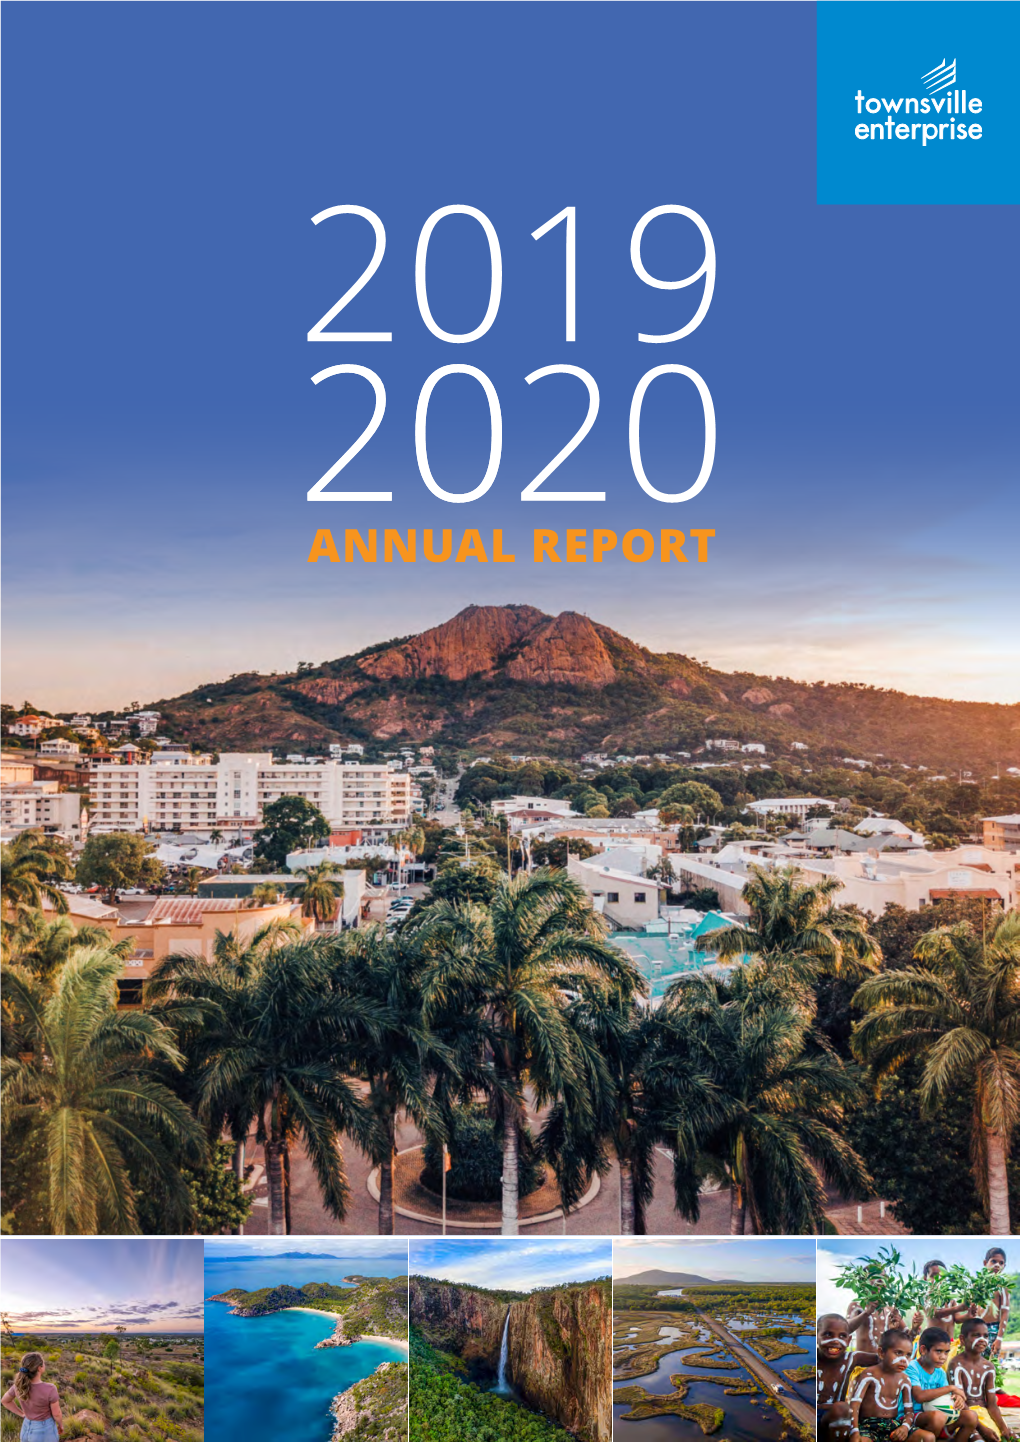 Townsville Enterprise Annual Report 2019/20 1 WHAT’S INSIDE